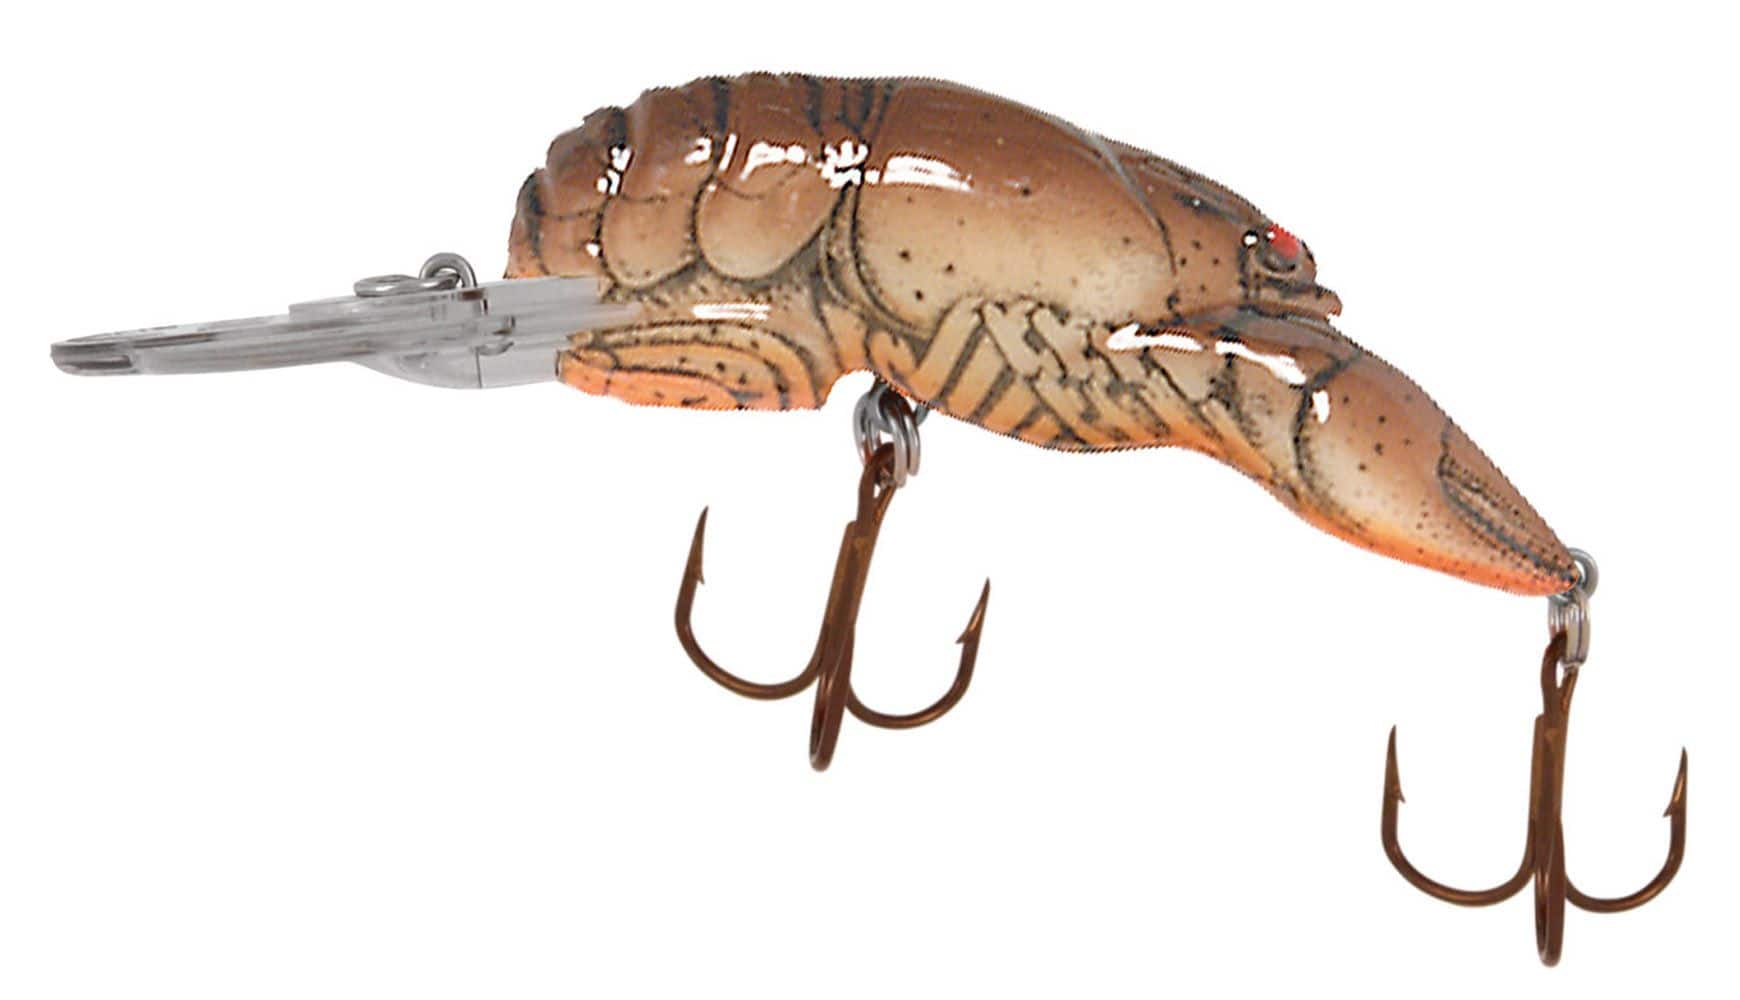 6 Reasons Why The Rebel Crawfish Is An Awesome Lure - Premier Angler